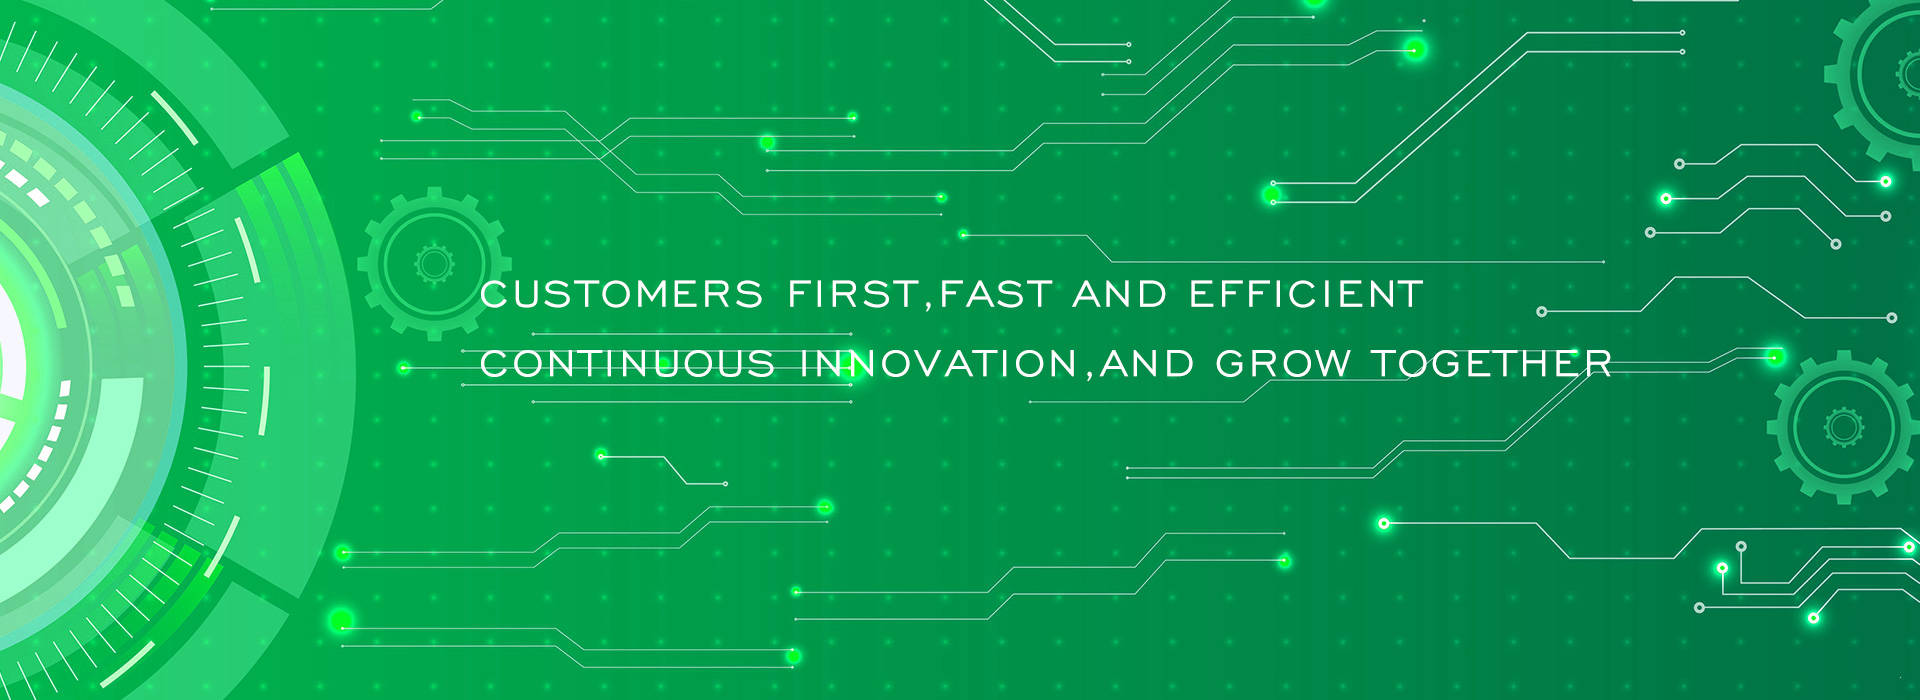 Customers first, fast and efficient, continuous innovation, and grow together